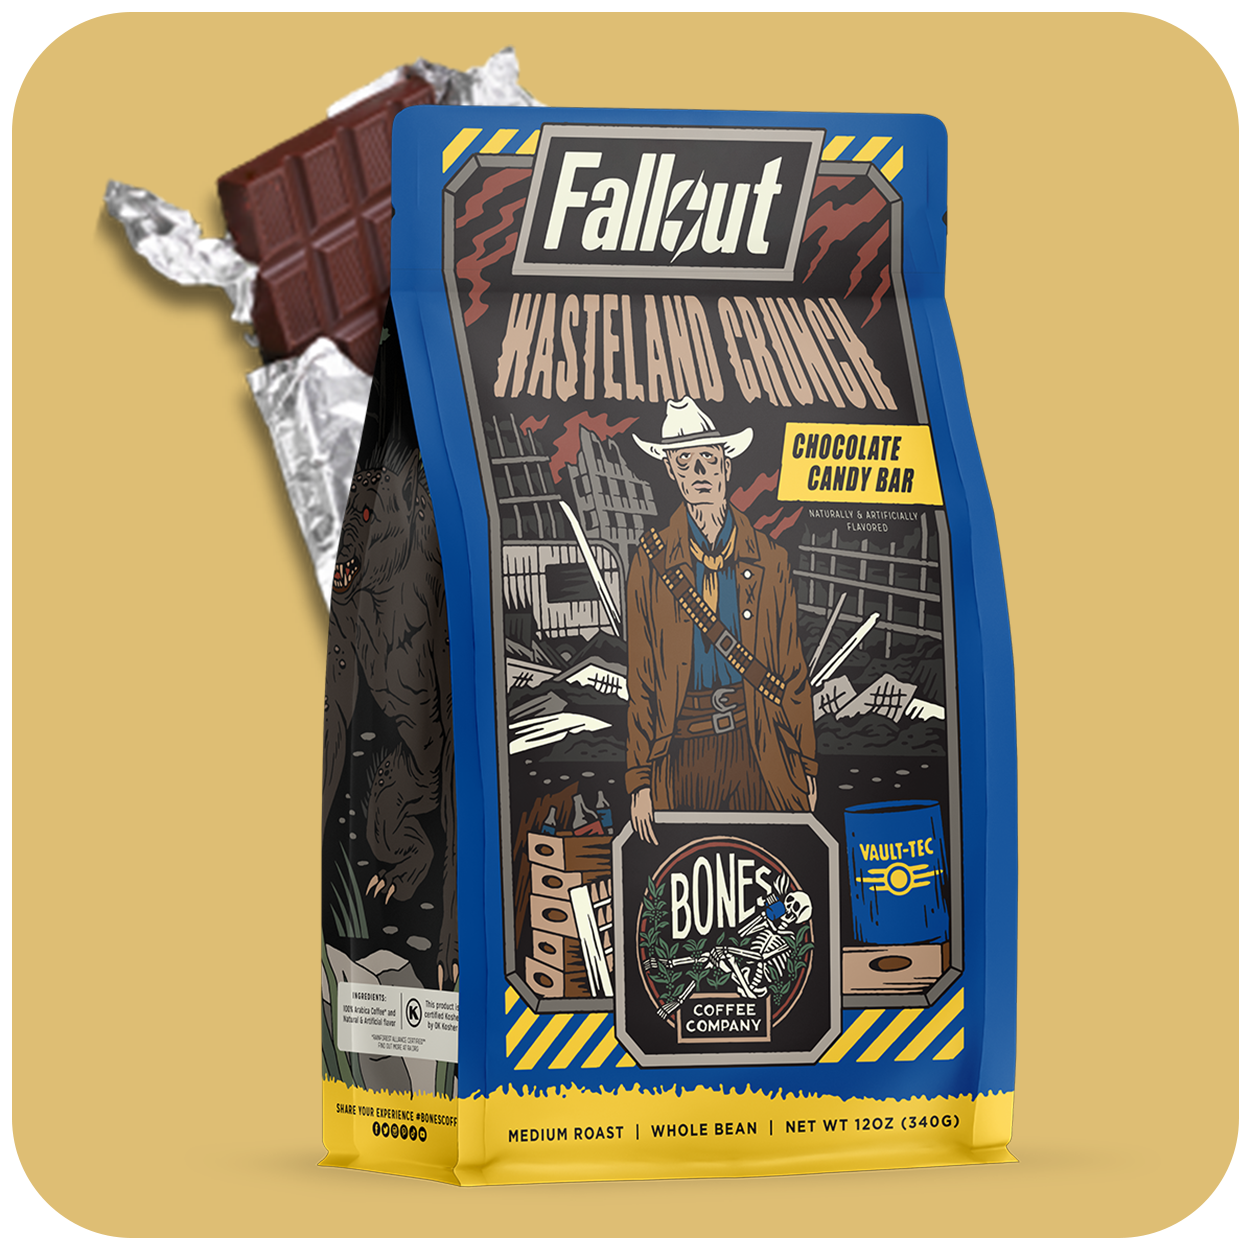 A 12 ounce bag of flavored coffee inspired by Fallout named Wasteland Crunch. Its flavor is chocolate candy bar. On the art is The Ghoul from the Fallout show, and there is a chocolate candy bar nearby it. A light brown rounded square is behind it.